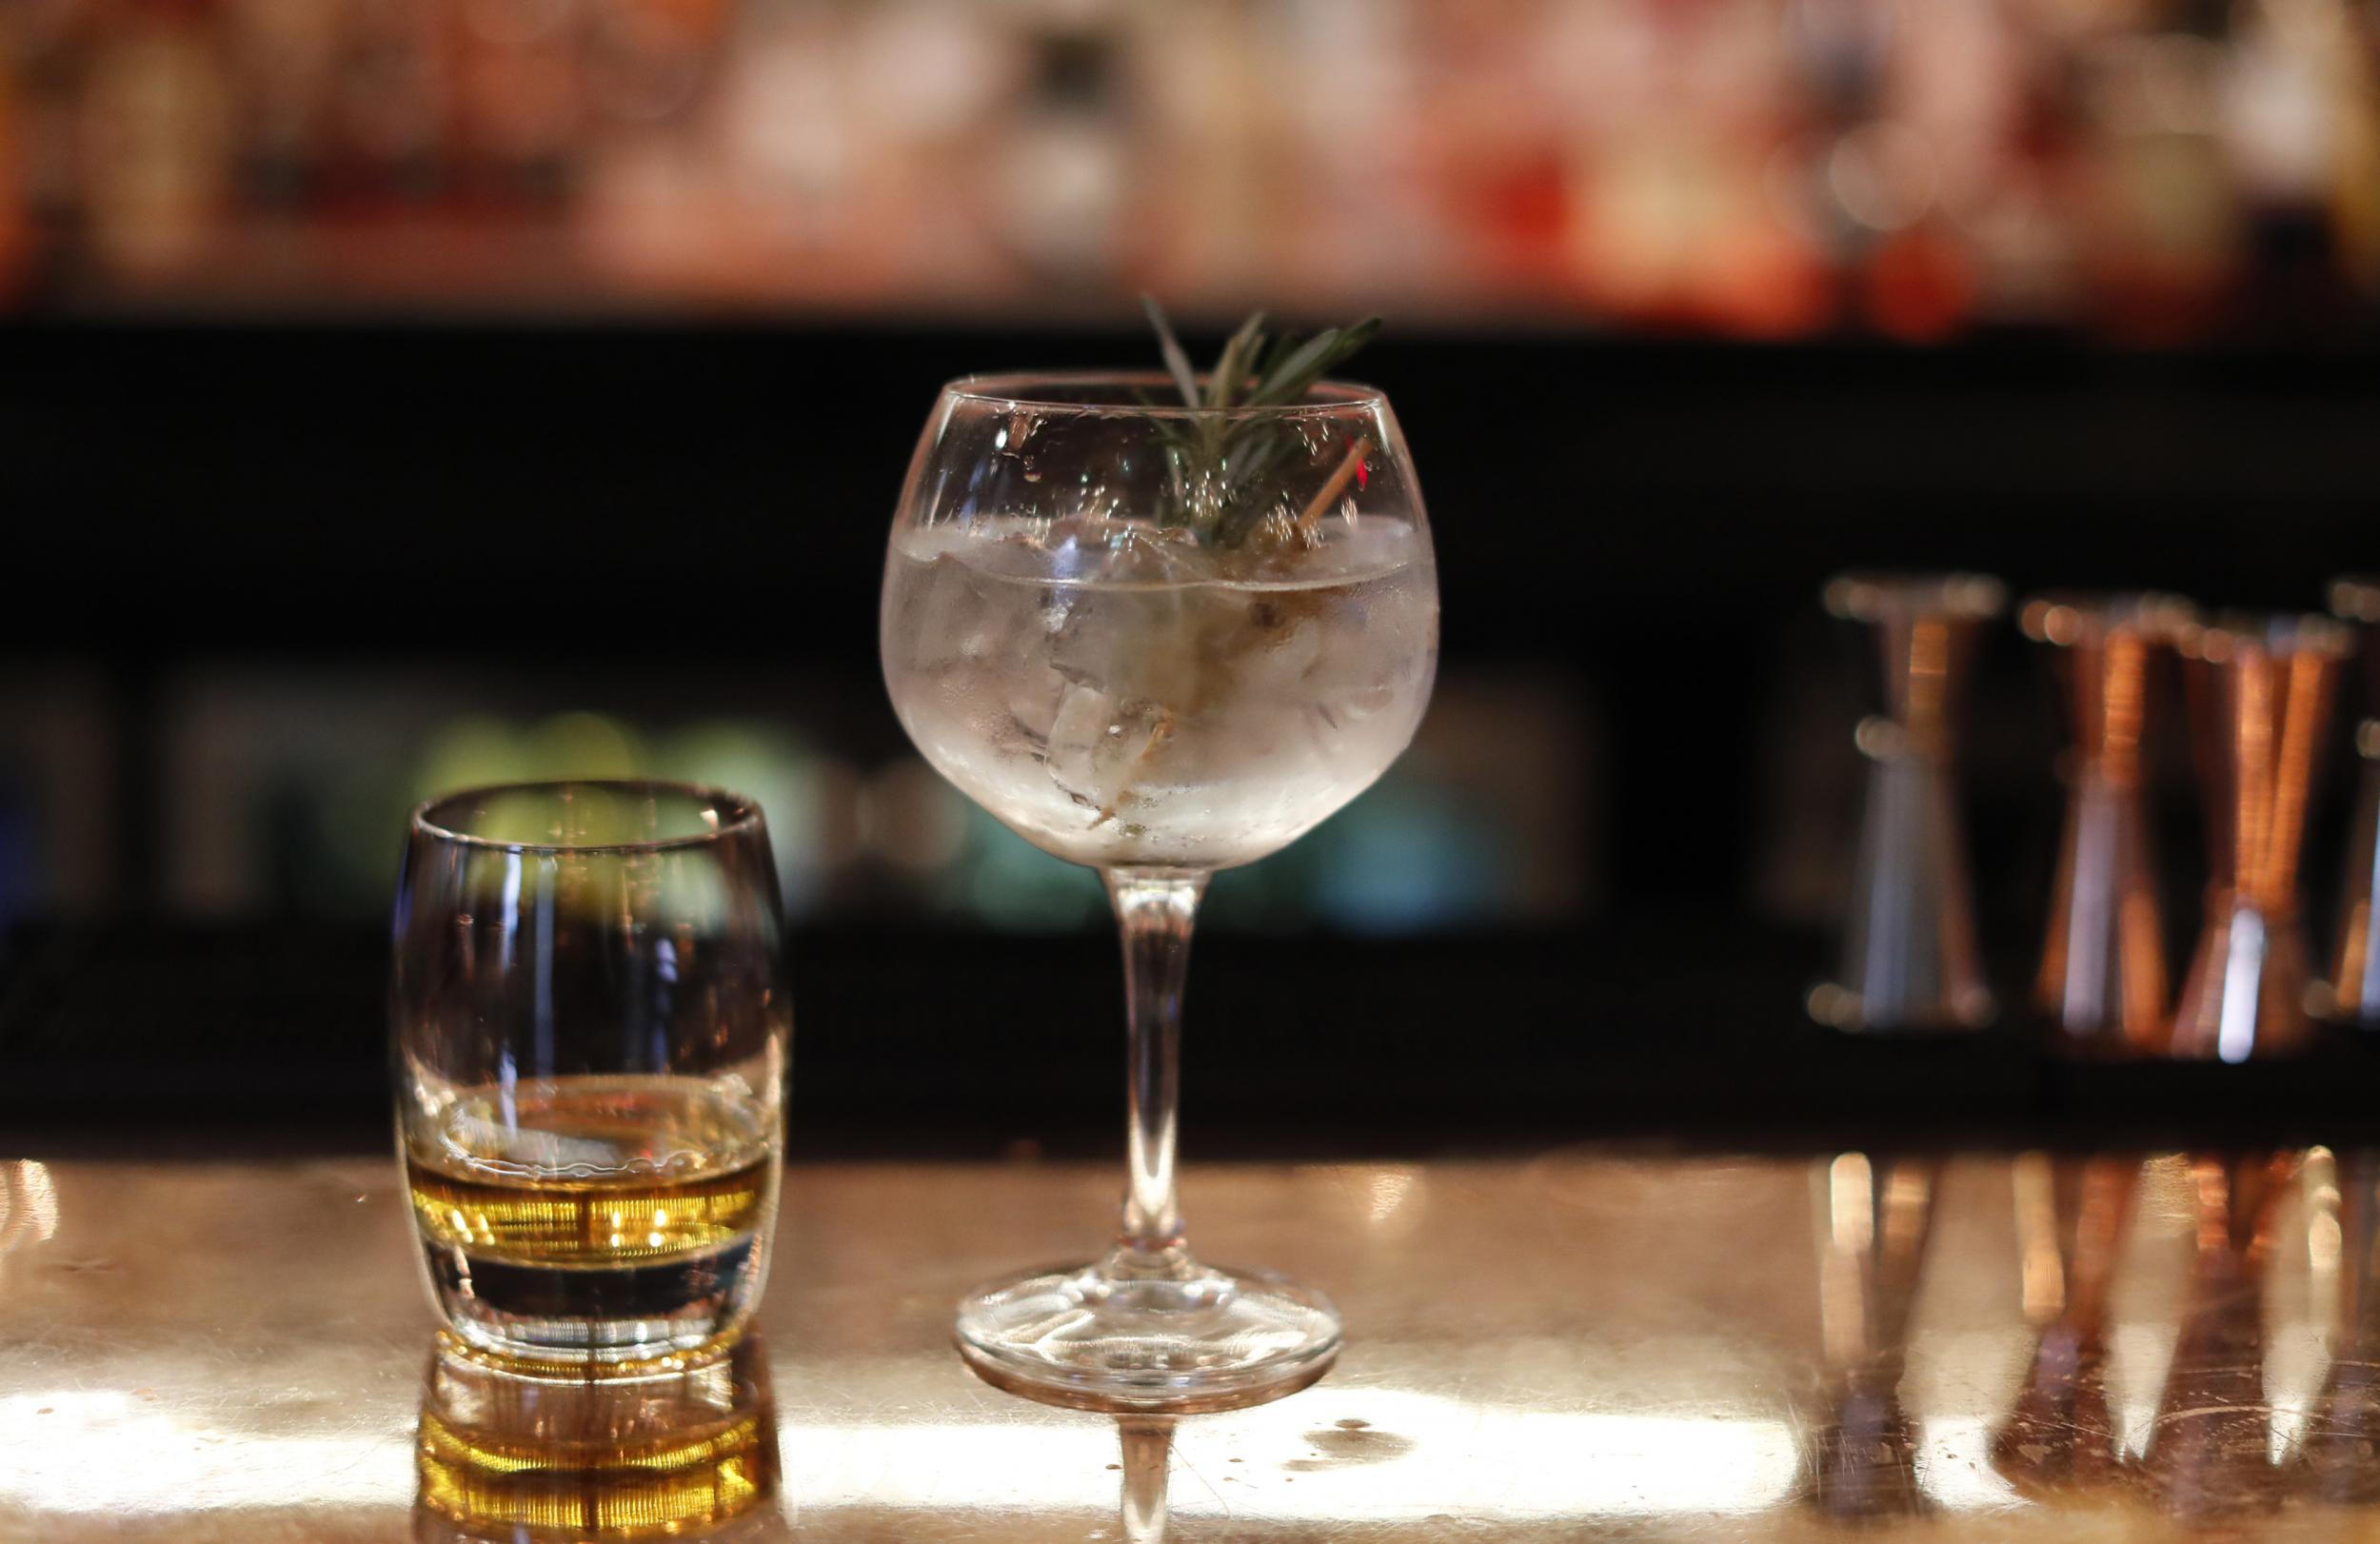 Sales of gin have doubled in value in the last six years to £1.2bn